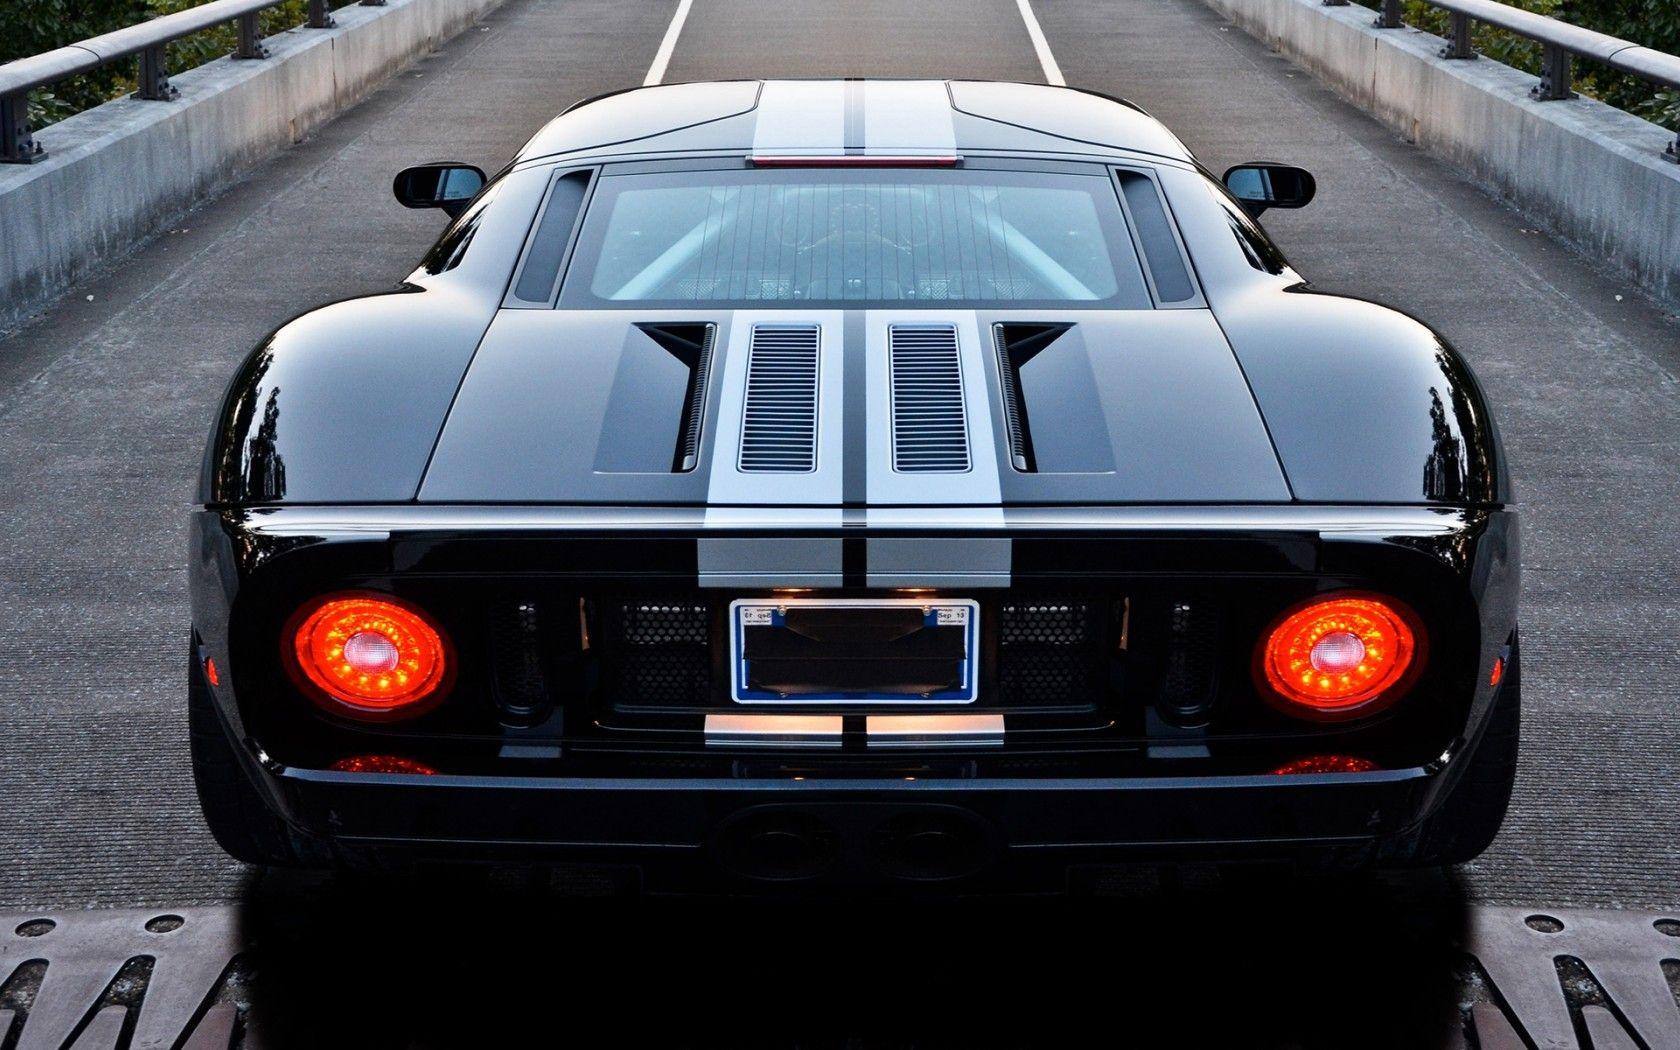 Ford GT Car Awesome HD Wallpaper(High Resolution). Ford gt, HD